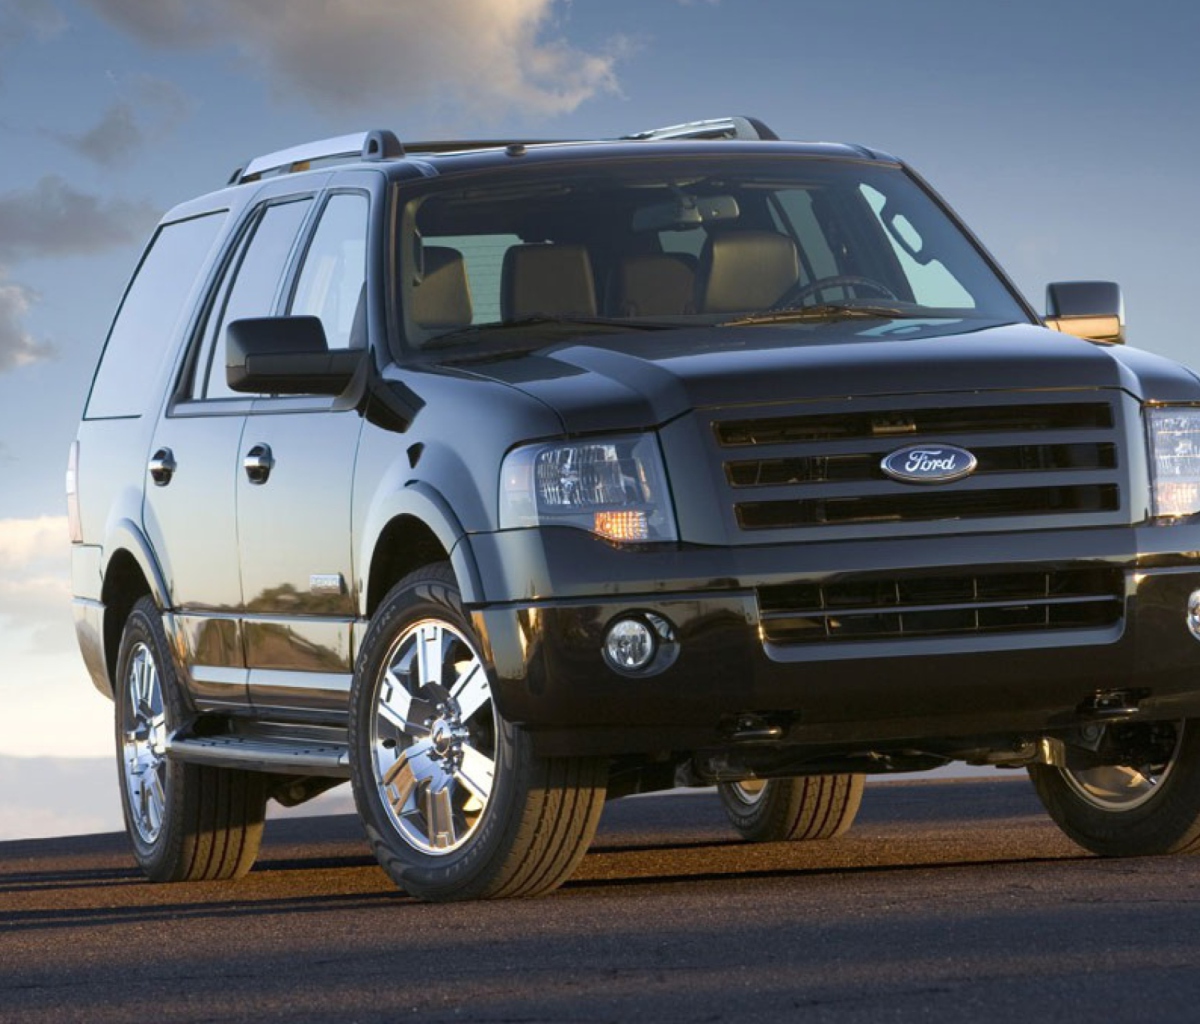 Ford Expedition wallpaper 1200x1024